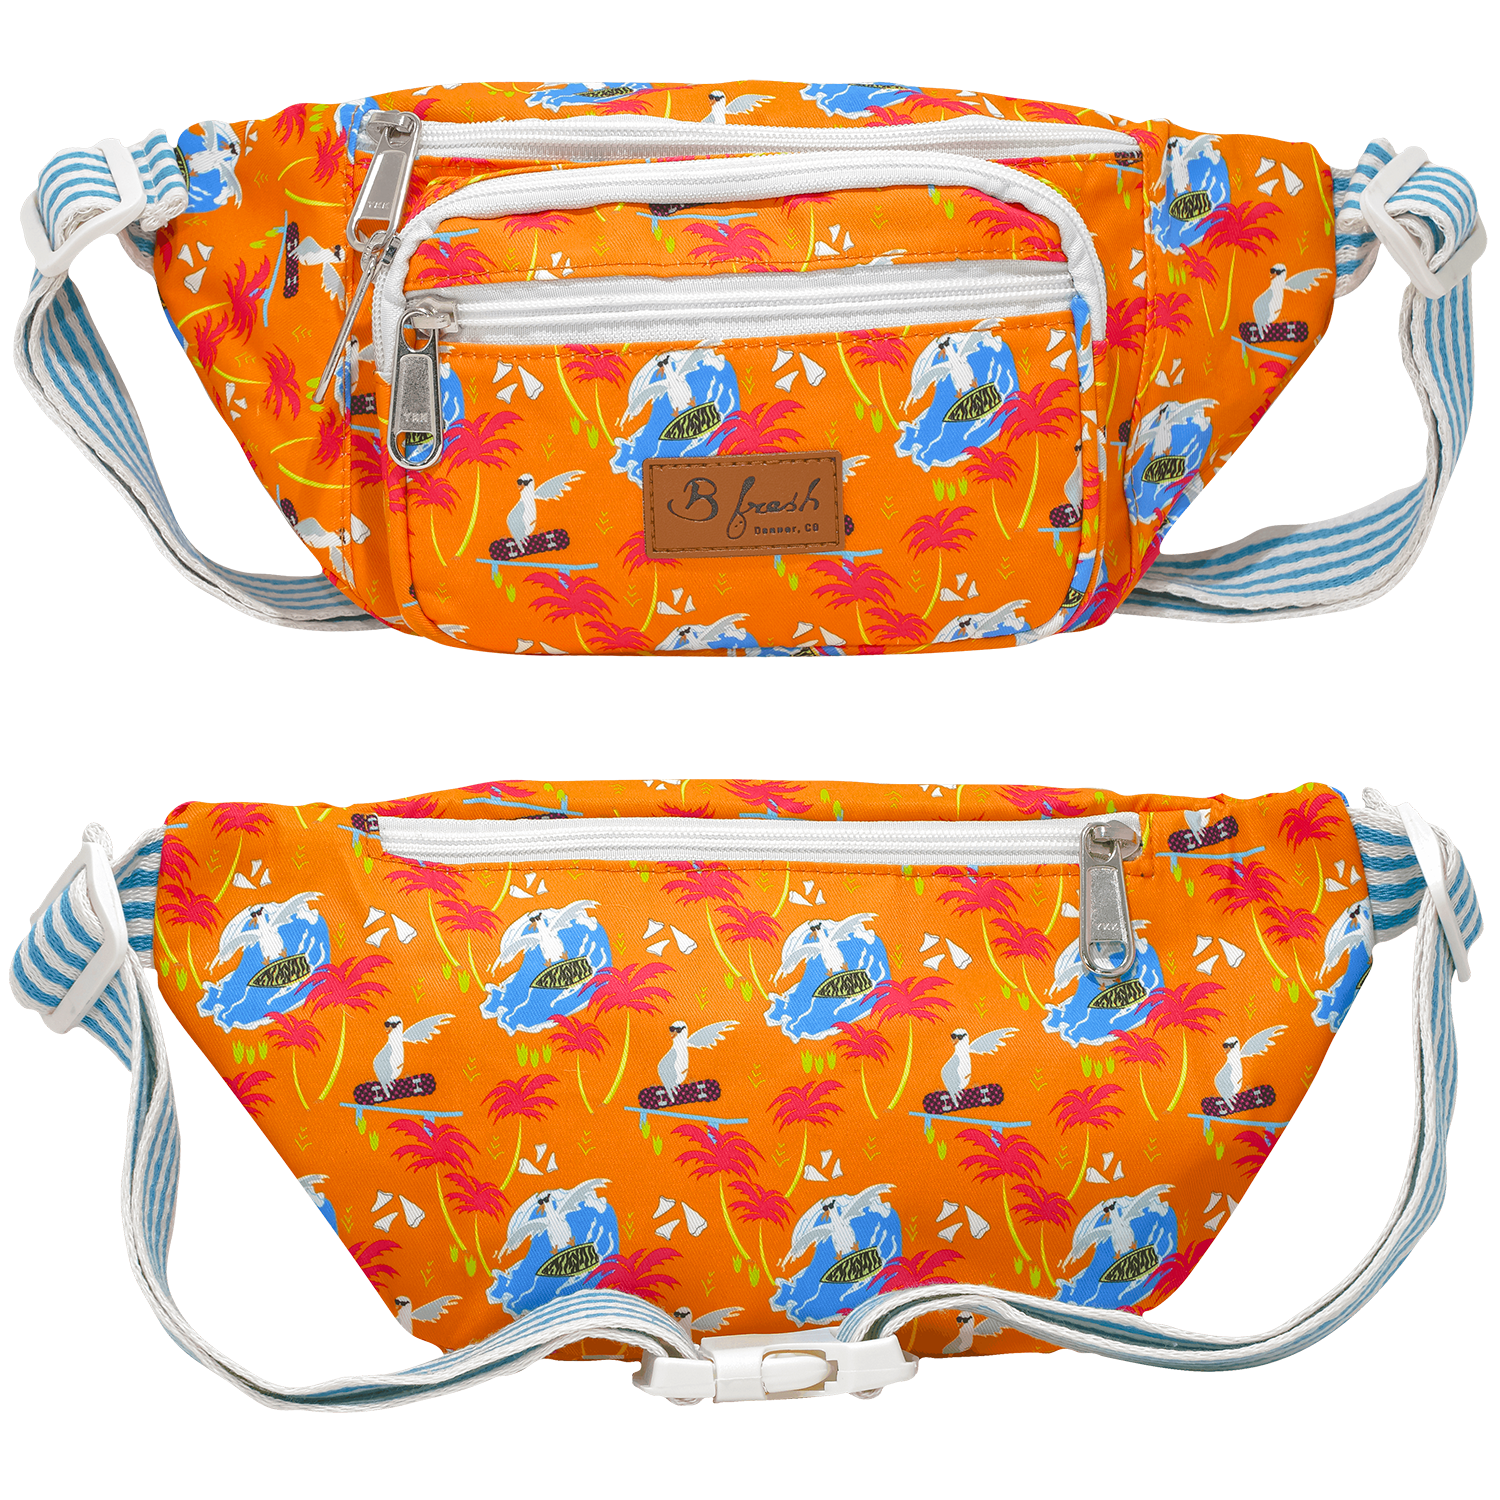 Surfin' Birds Retro Fanny Pack - Radical 80s beach surfing bird orange white and blue design with blue and white stripped belt and 4 pockets fanny pack. B Fresh Gear